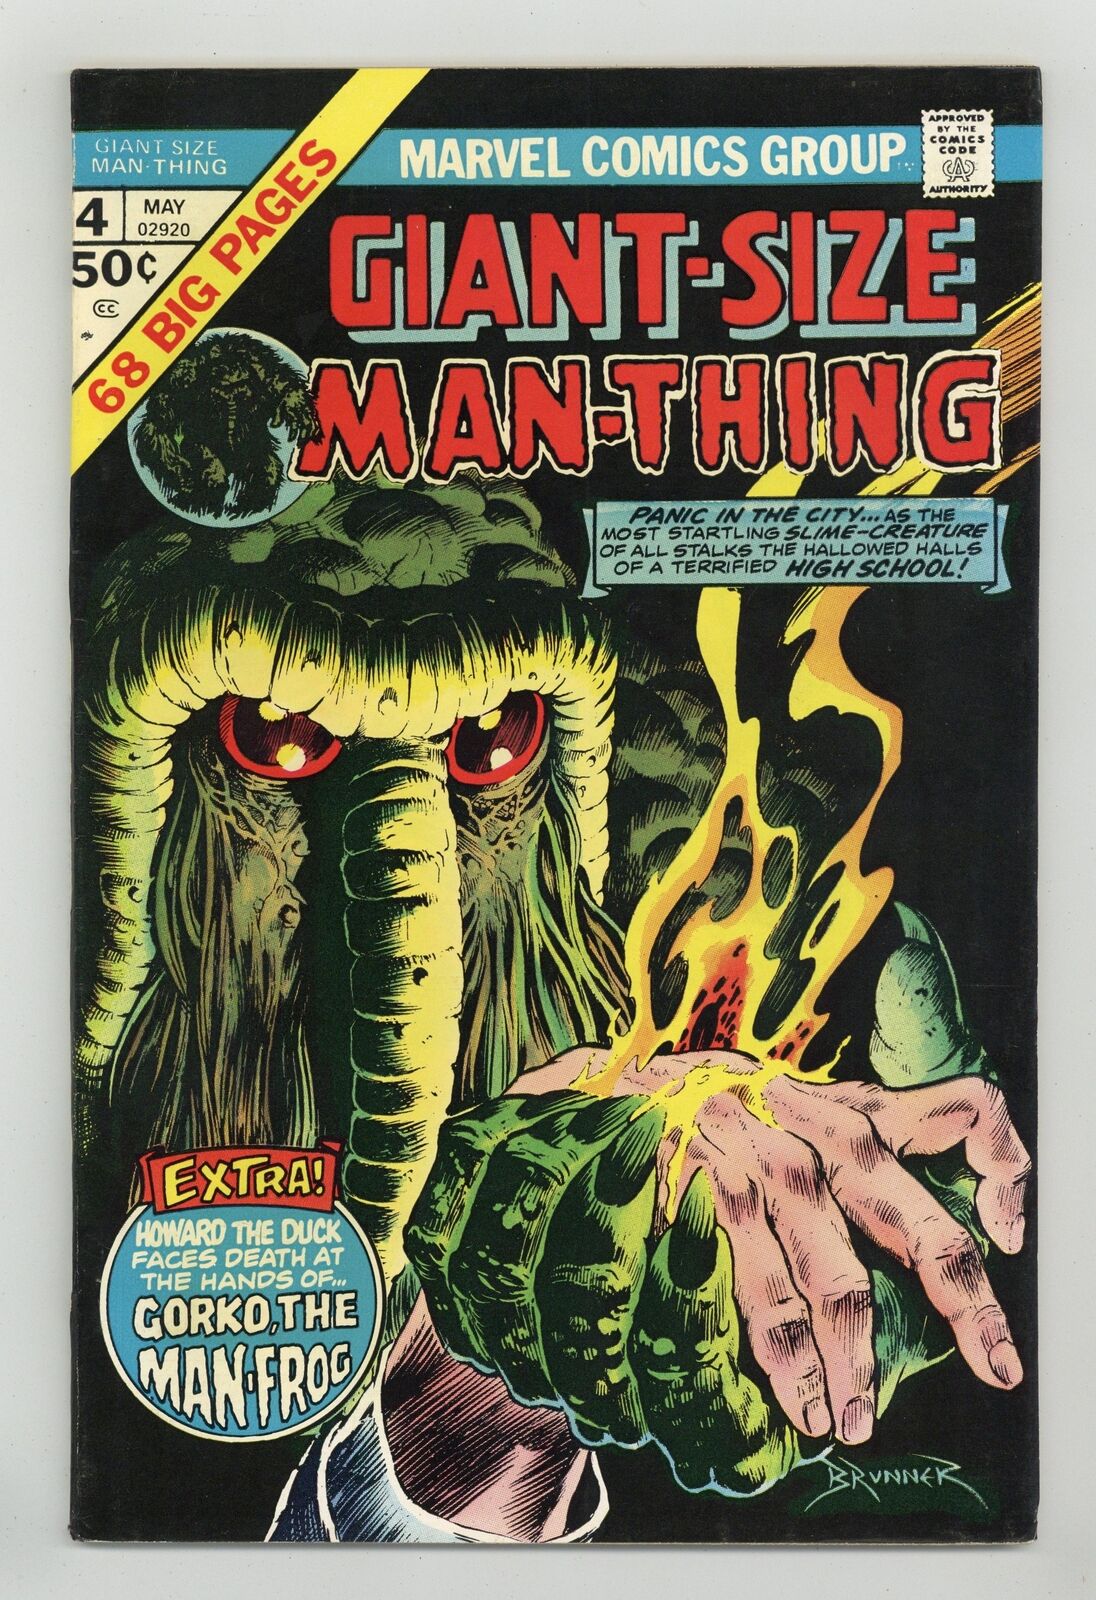 Giant Size Man-Thing #4 VG/FN 5.0 1975